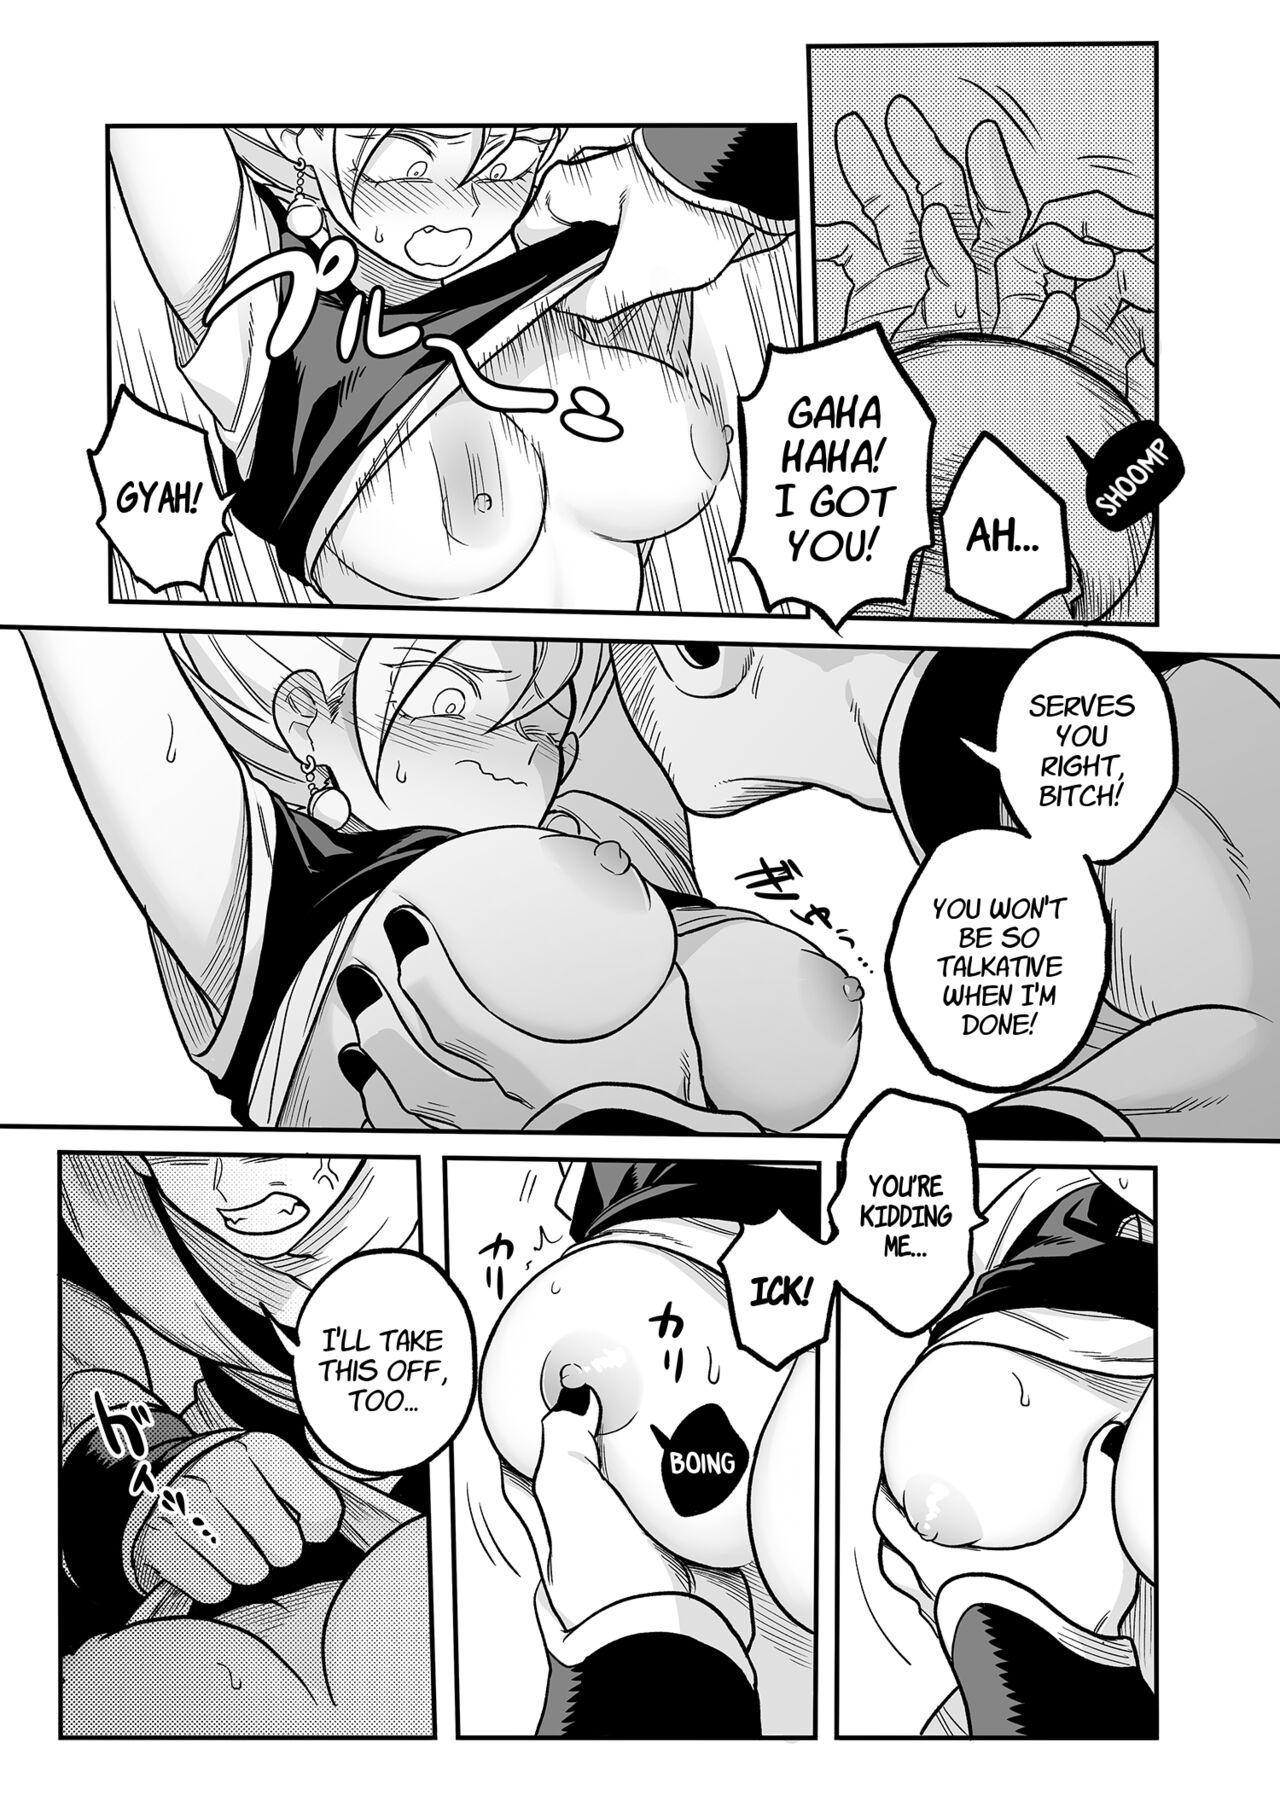 Outdoor You're Just a Small Fry Majin... - Dragon ball z Para - Page 5